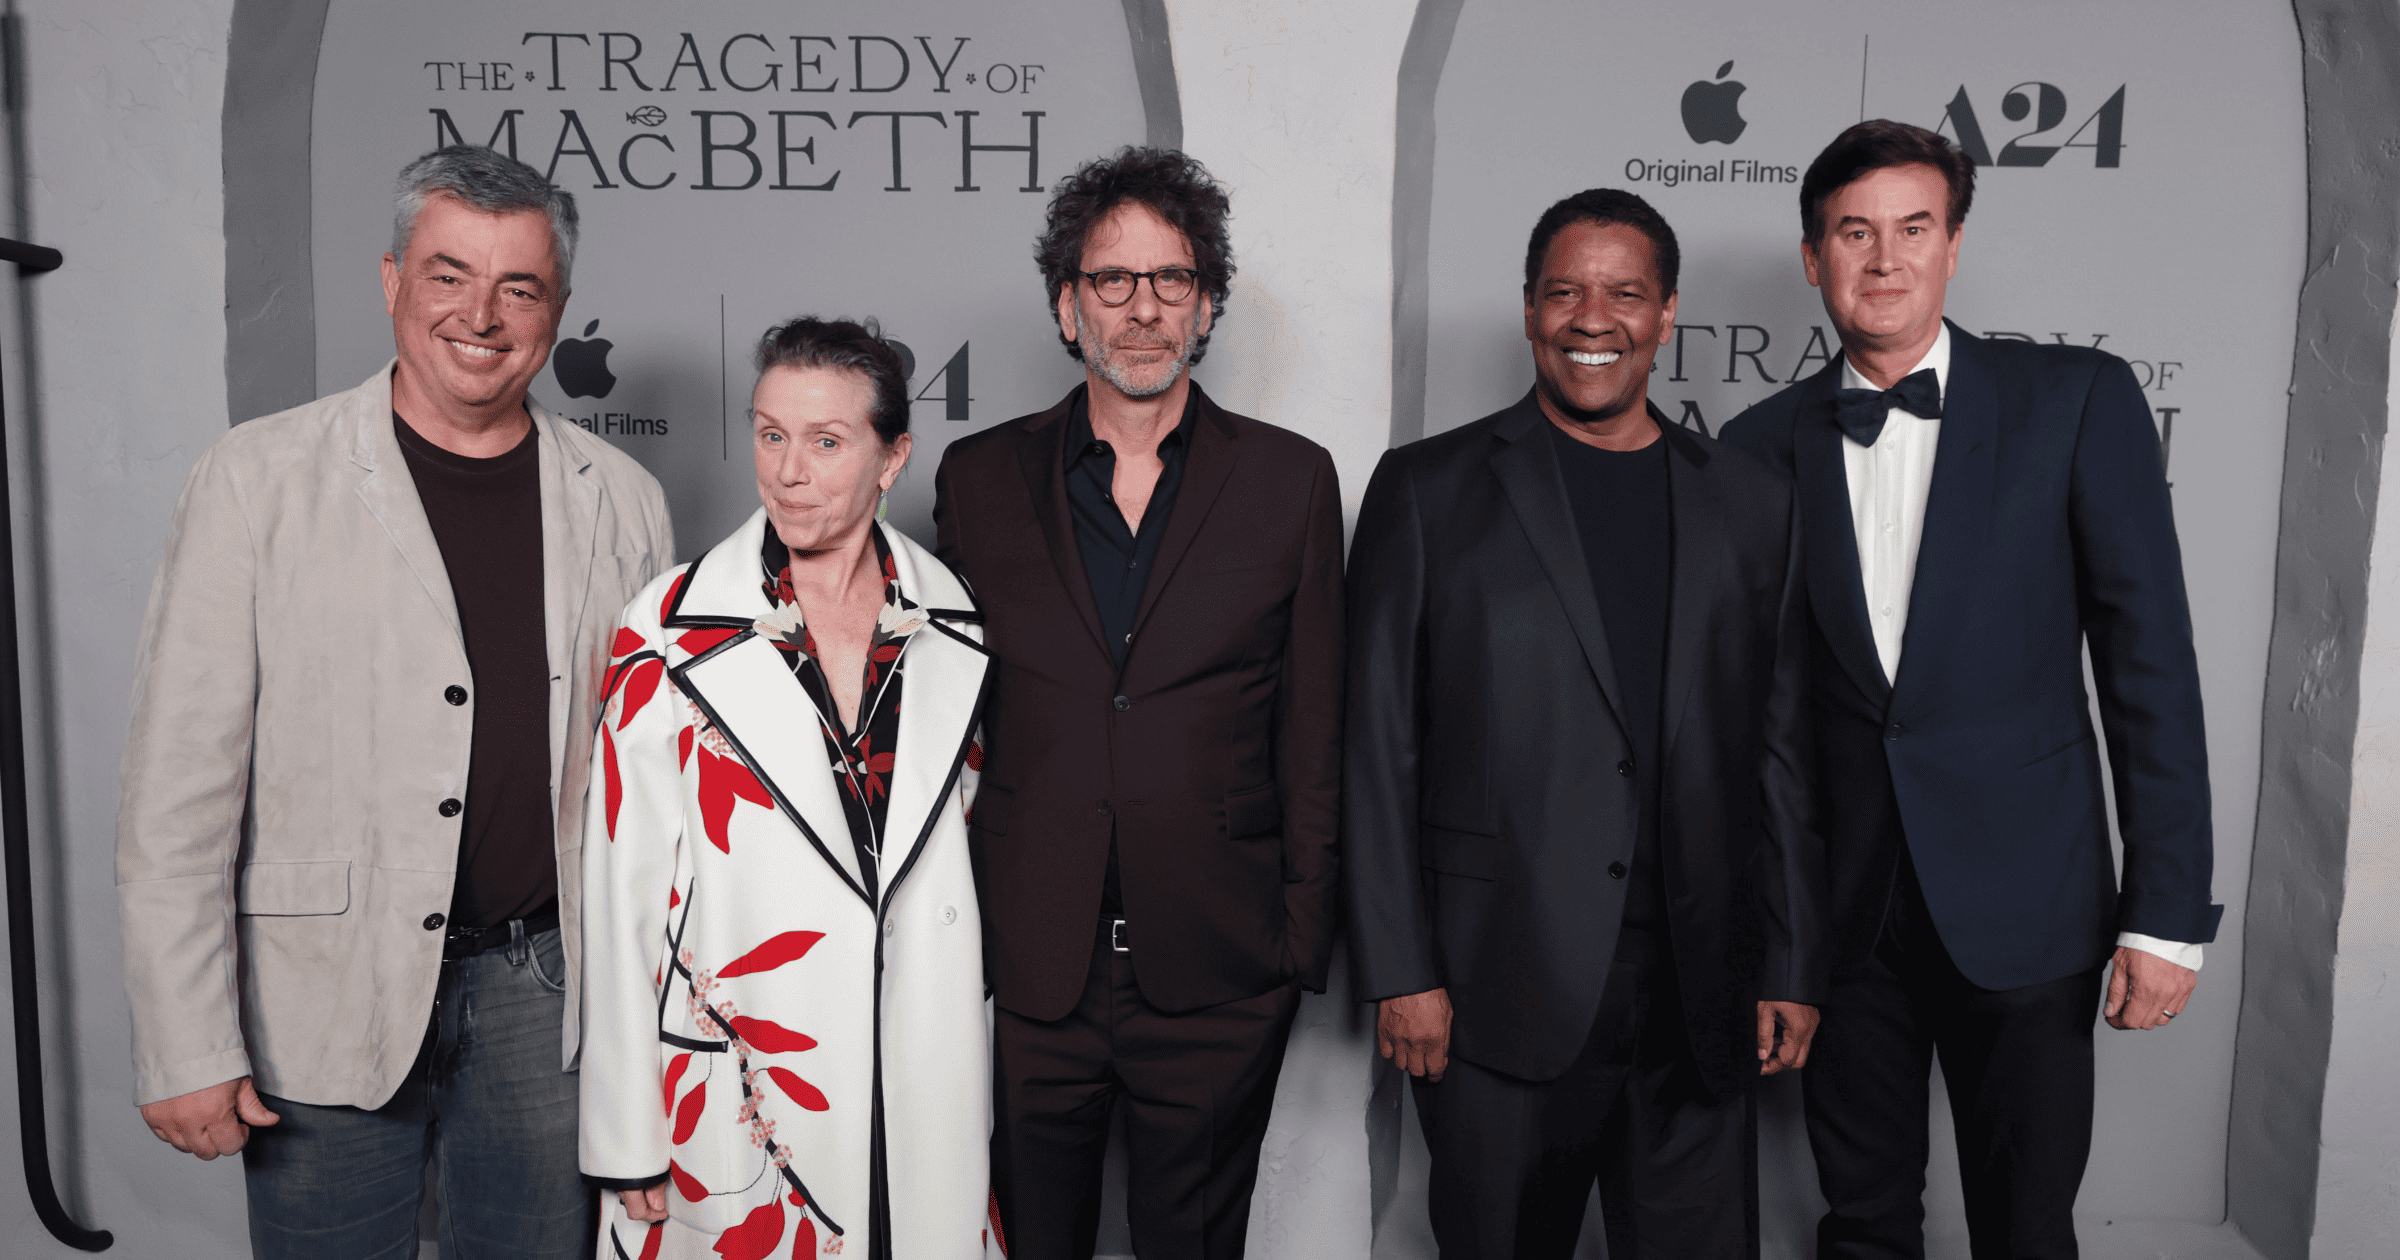 The Tragedy of Macbeth stars and Apple Execs